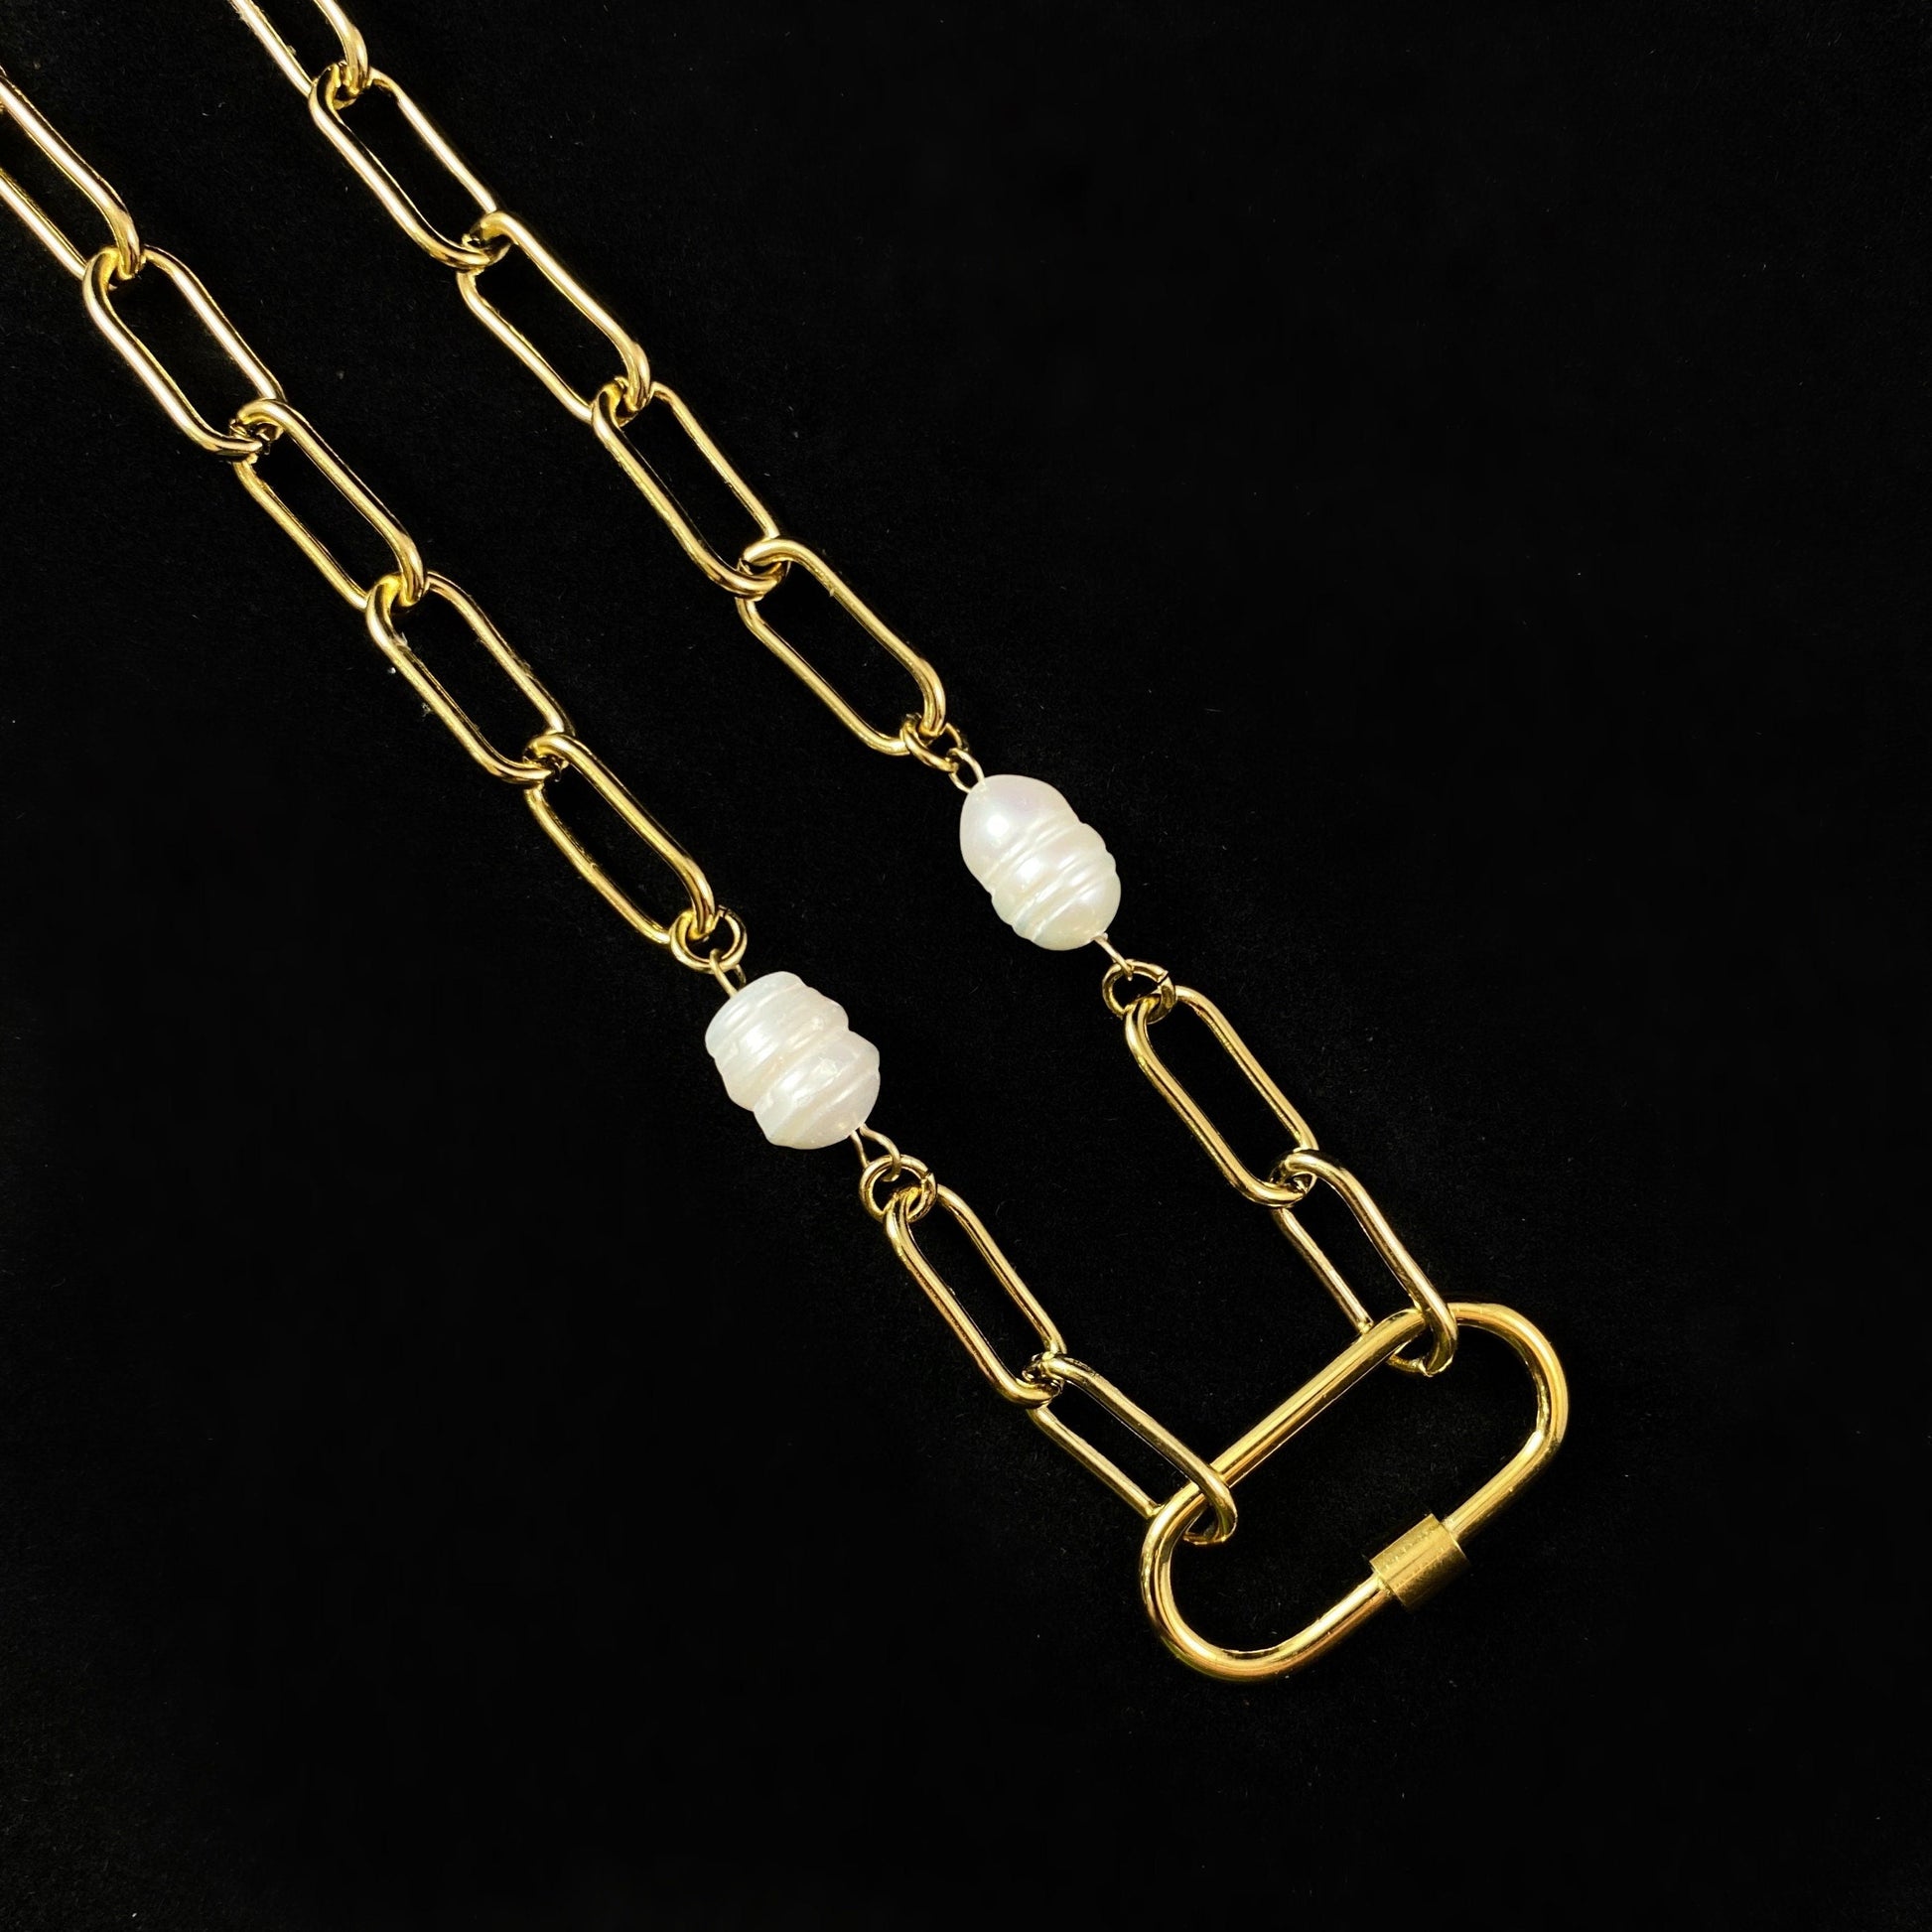 White Pearl Necklace with Gold Chain Link Accents